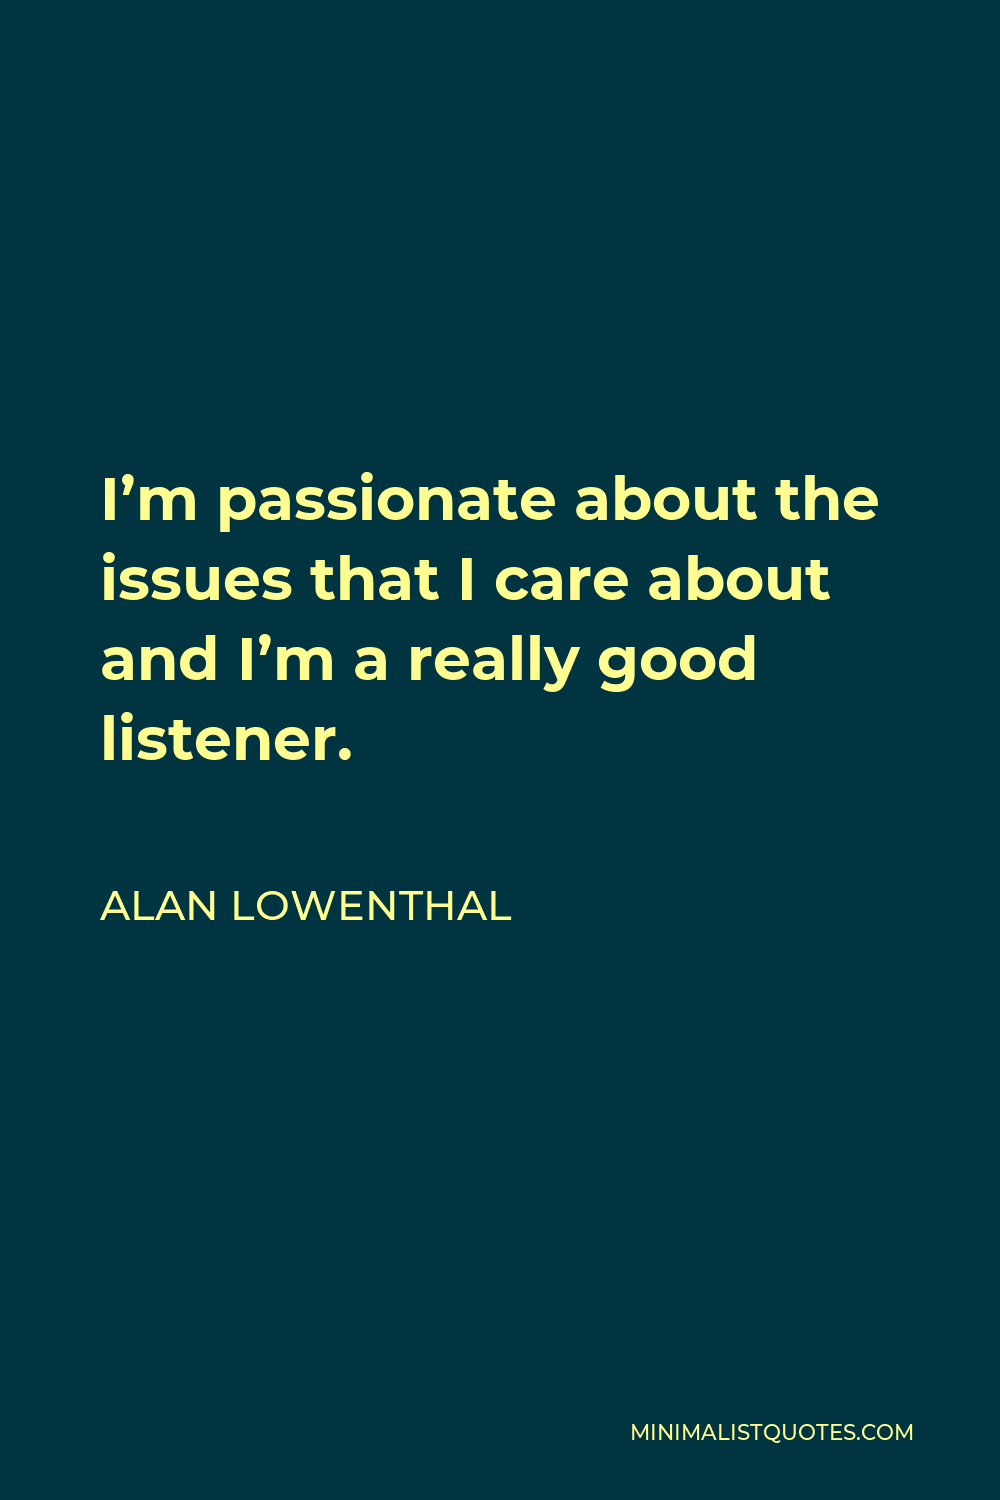 Alan Lowenthal Quote - I’m passionate about the issues that I care about and I’m a really good listener.